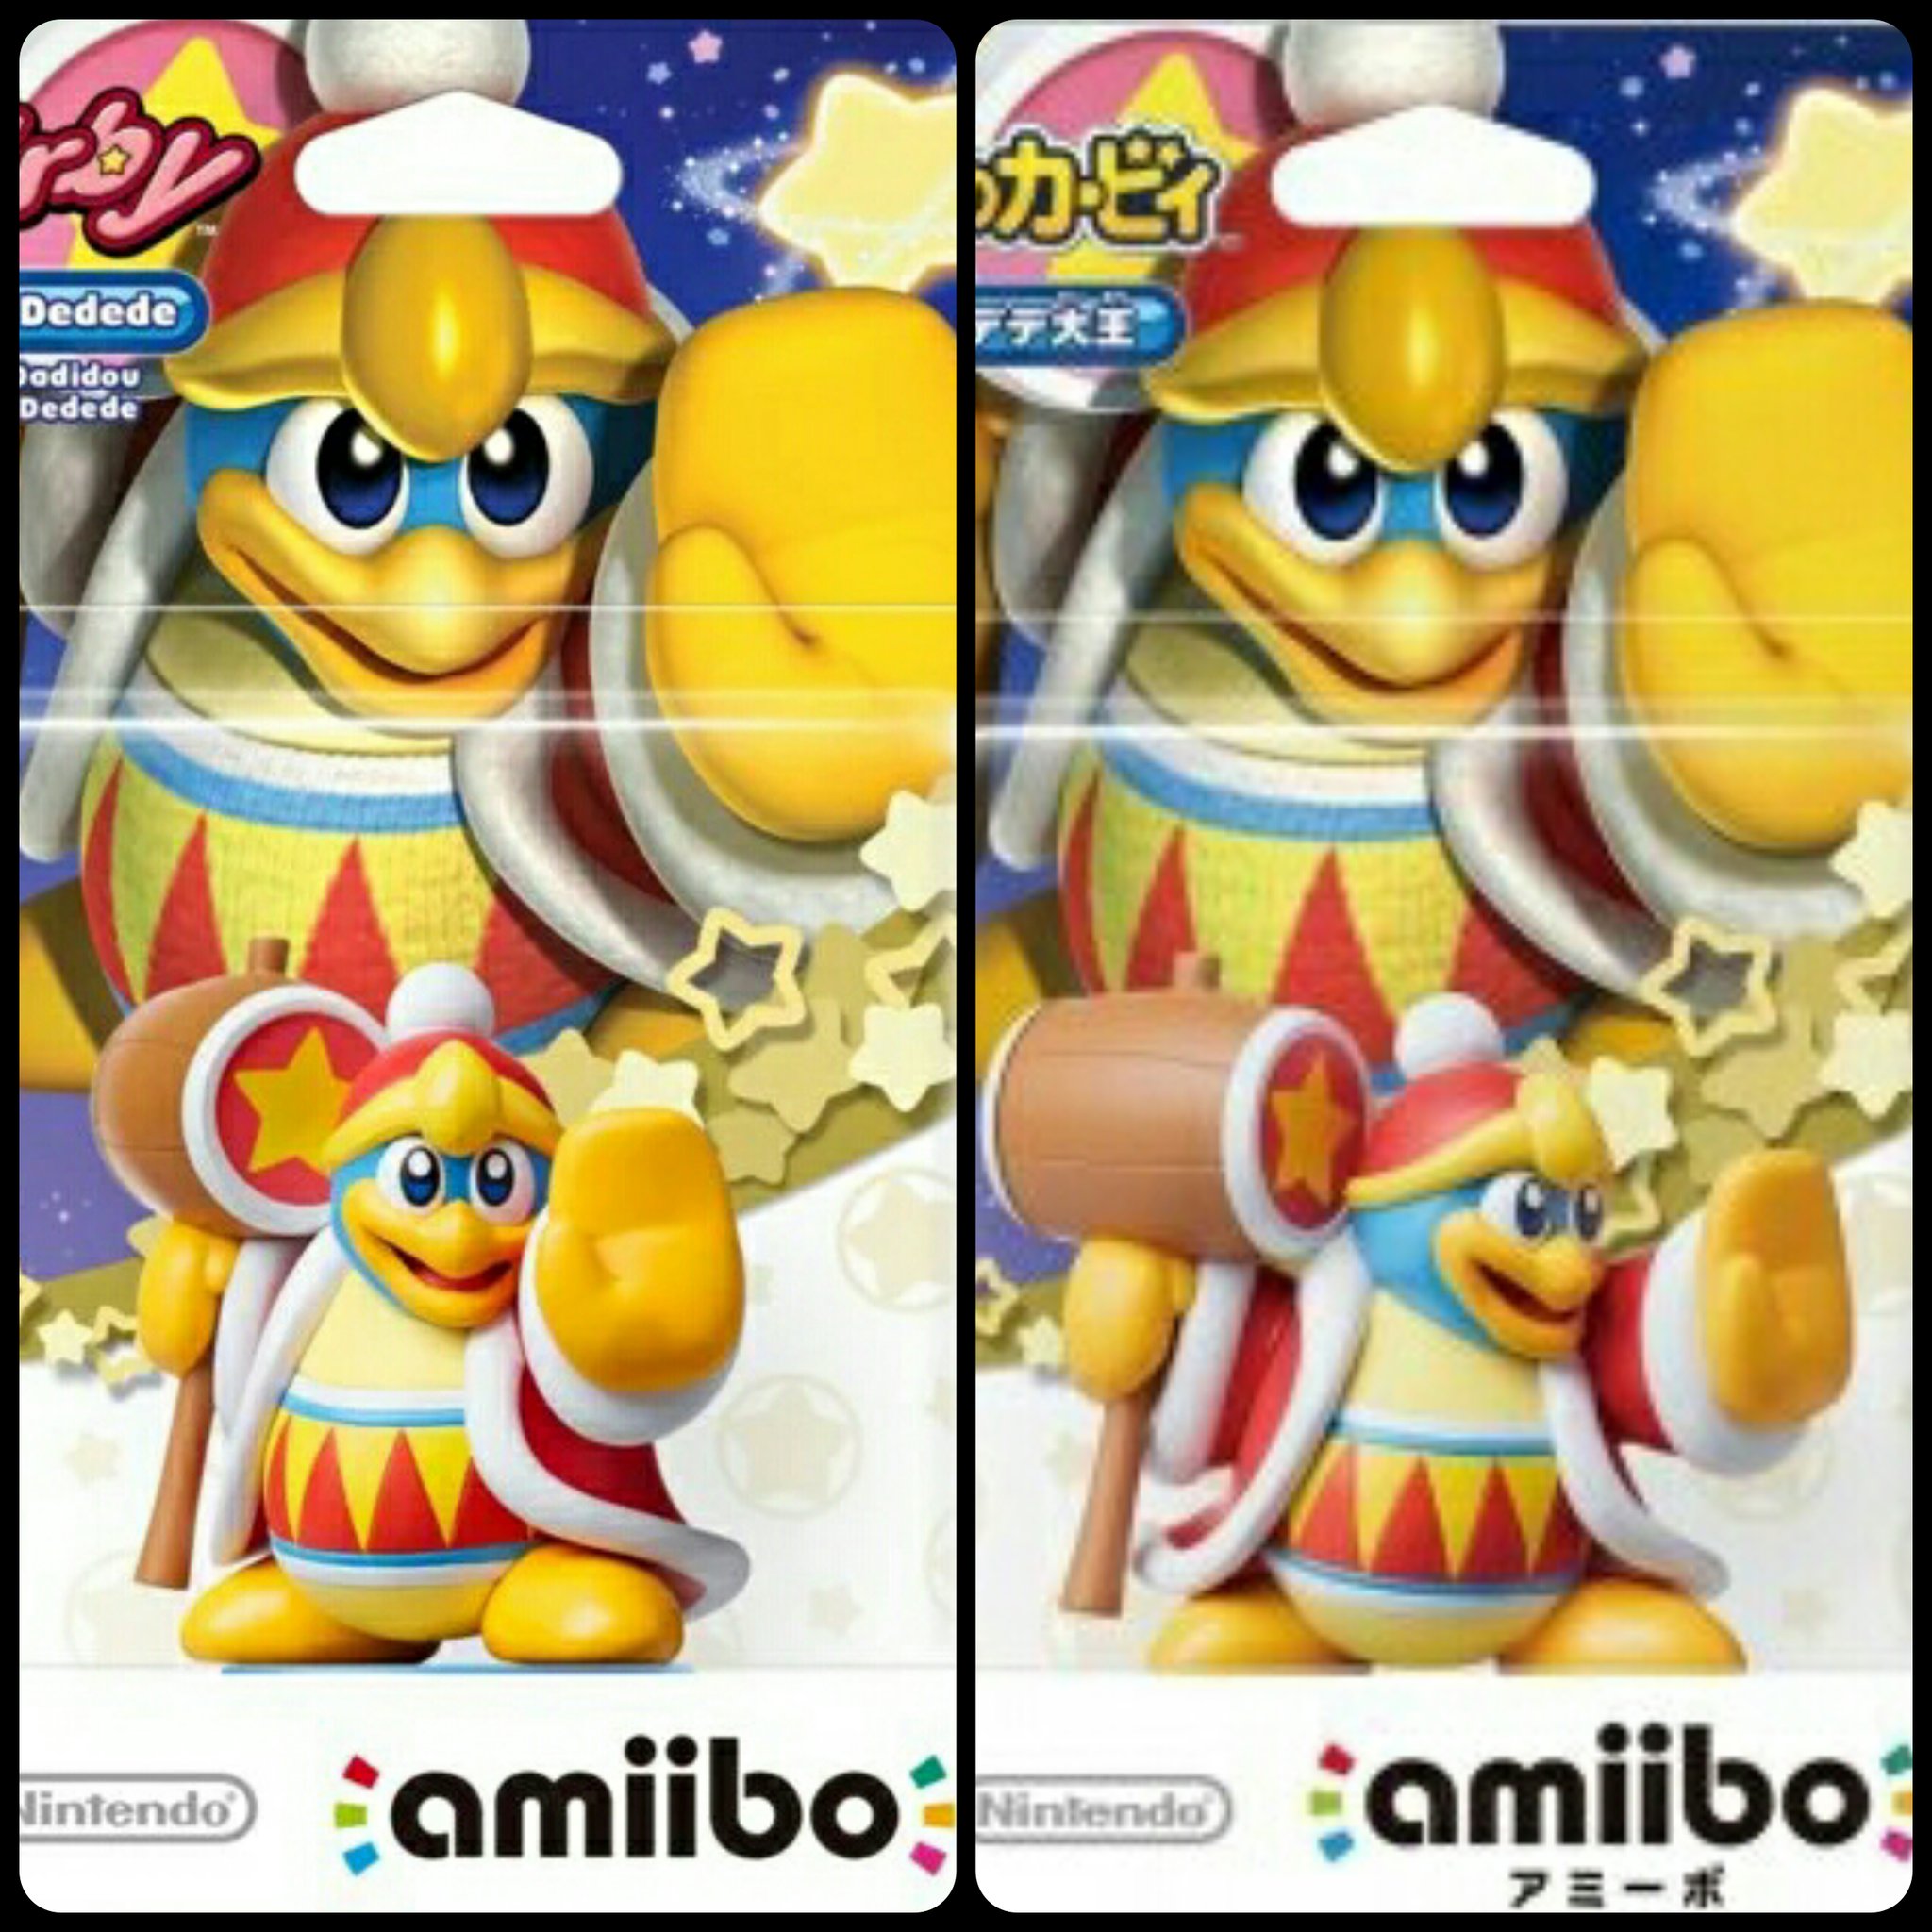 binde Manga Uensartet amiibo Alerts al Twitter: "The new Kirby series King Dedede's pose  direction differs between the JPN and NA versions. Releases 4/28 in Japan.  https://t.co/FhKvklxwDn" / Twitter